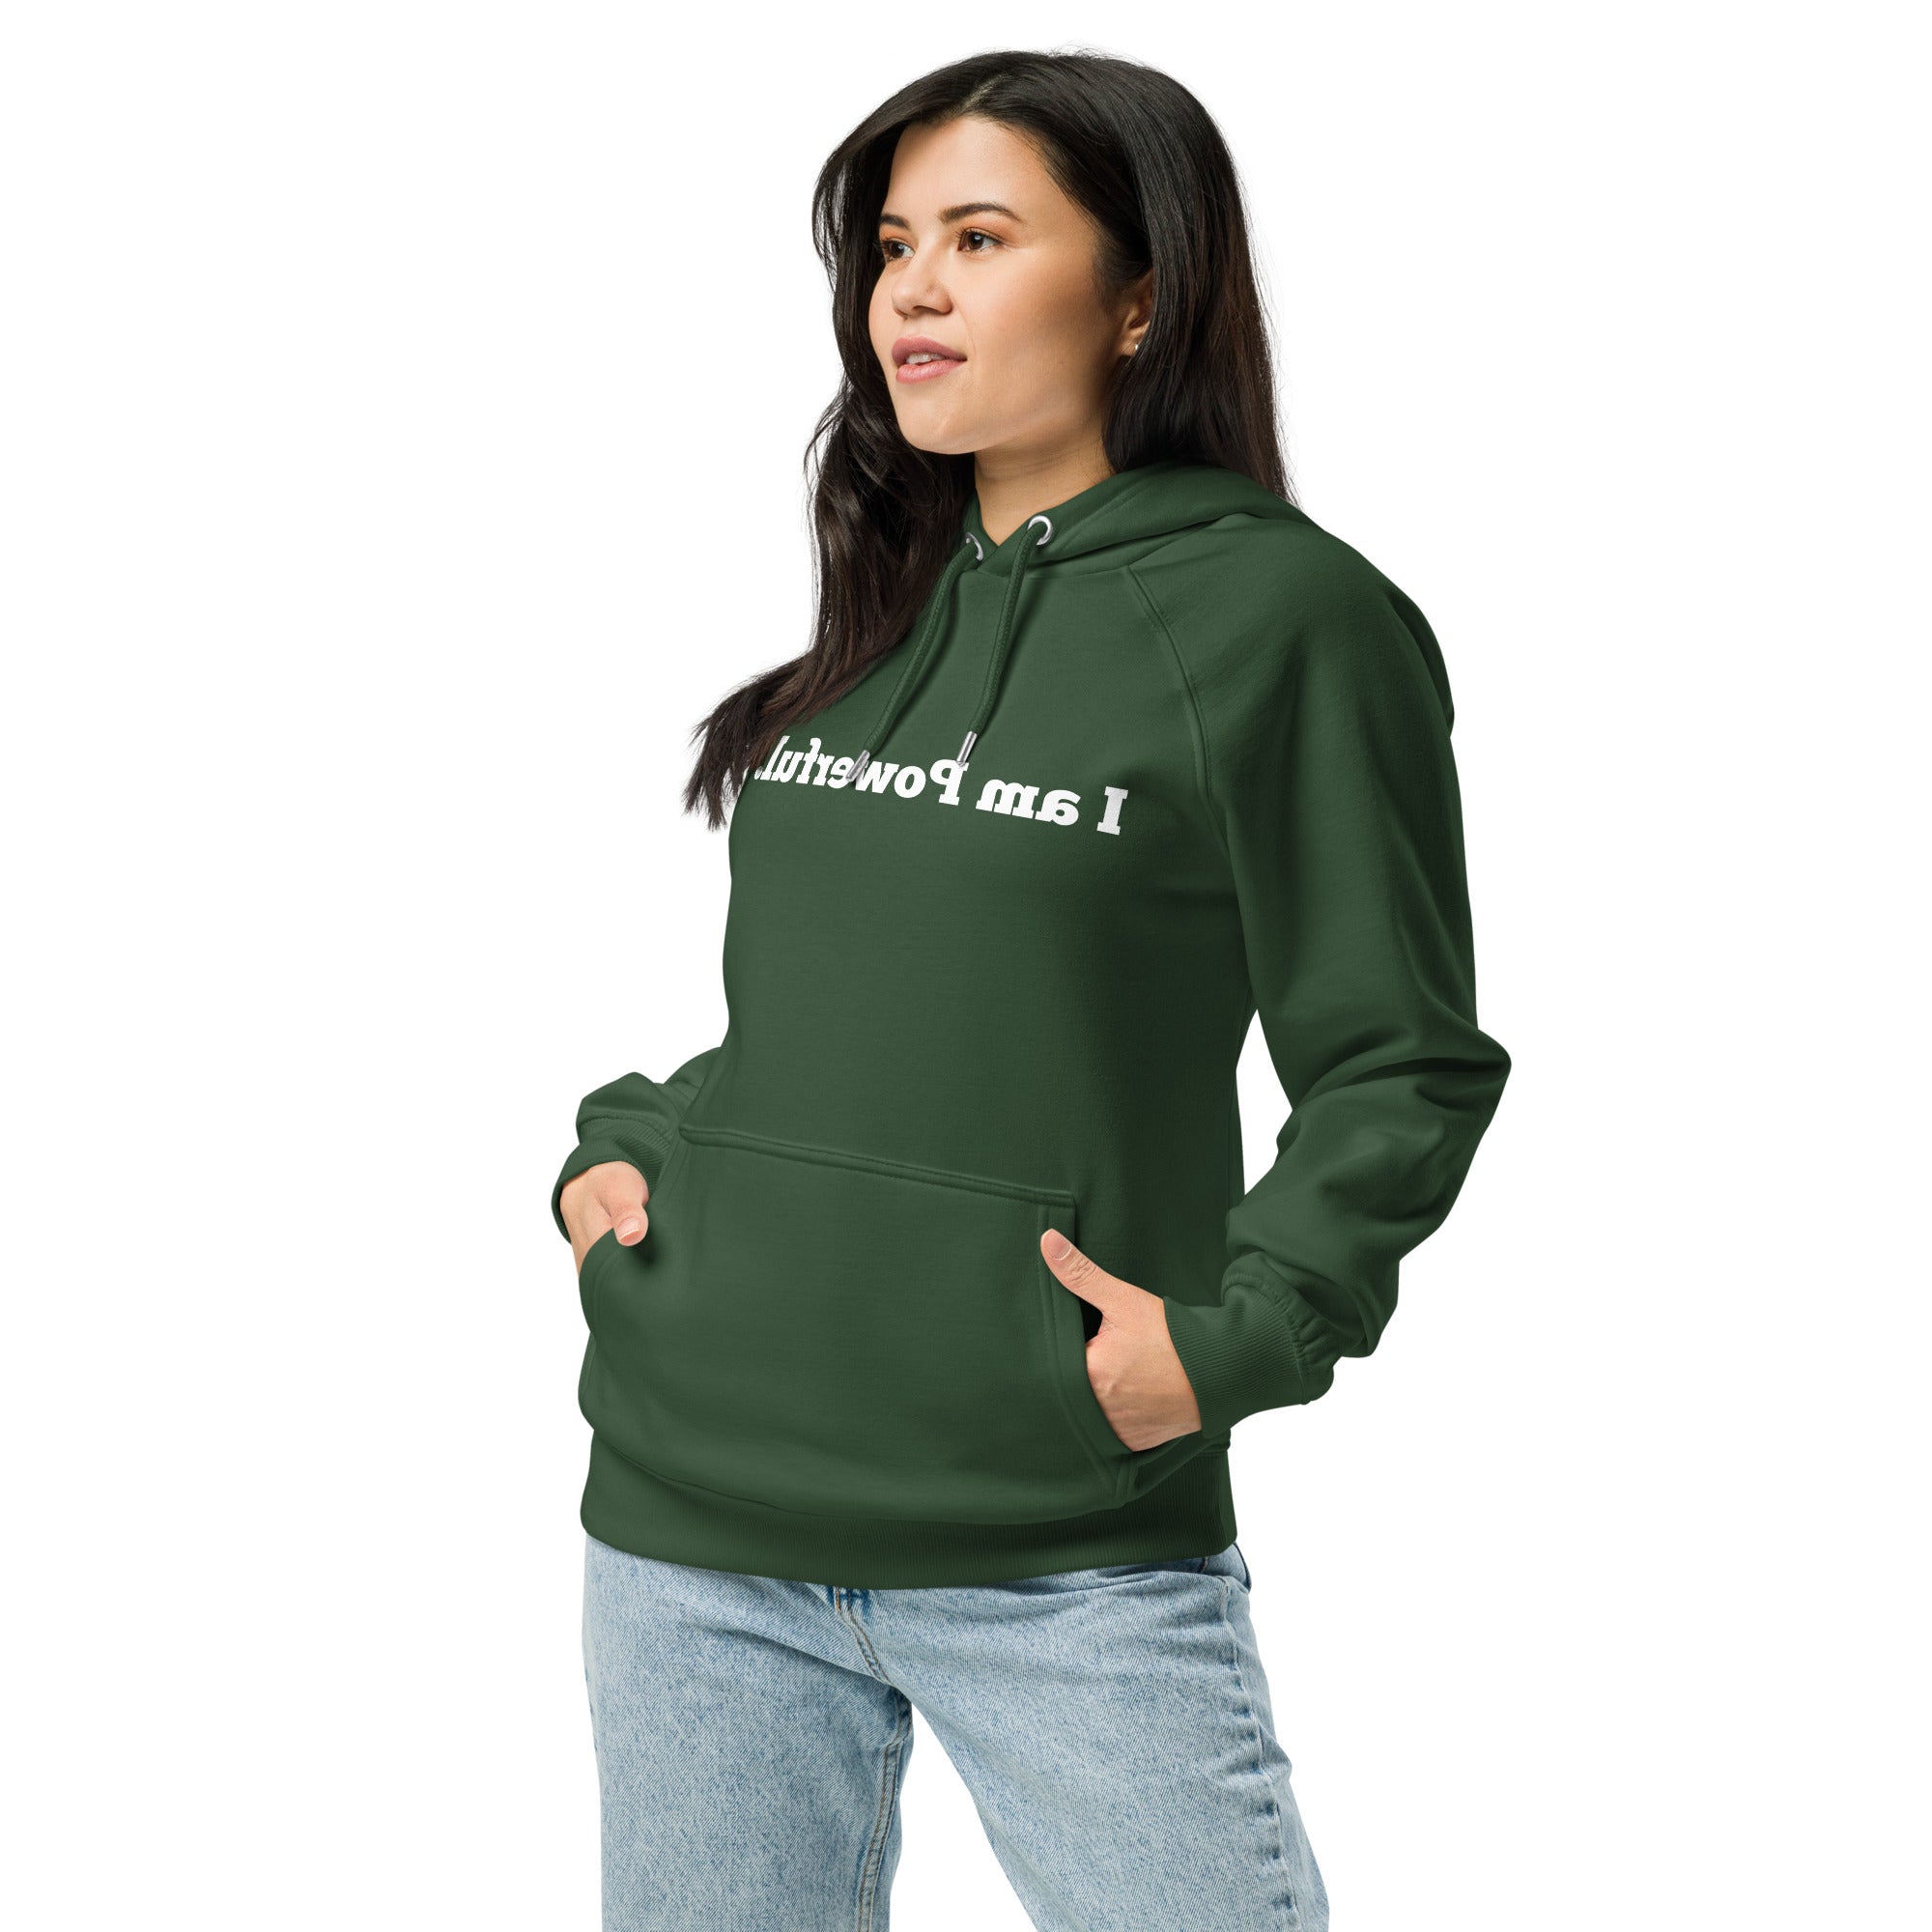 I AM POWERFUL Mirror Affirmation Hoodie (SLIM FIT) - 4 COLORS!